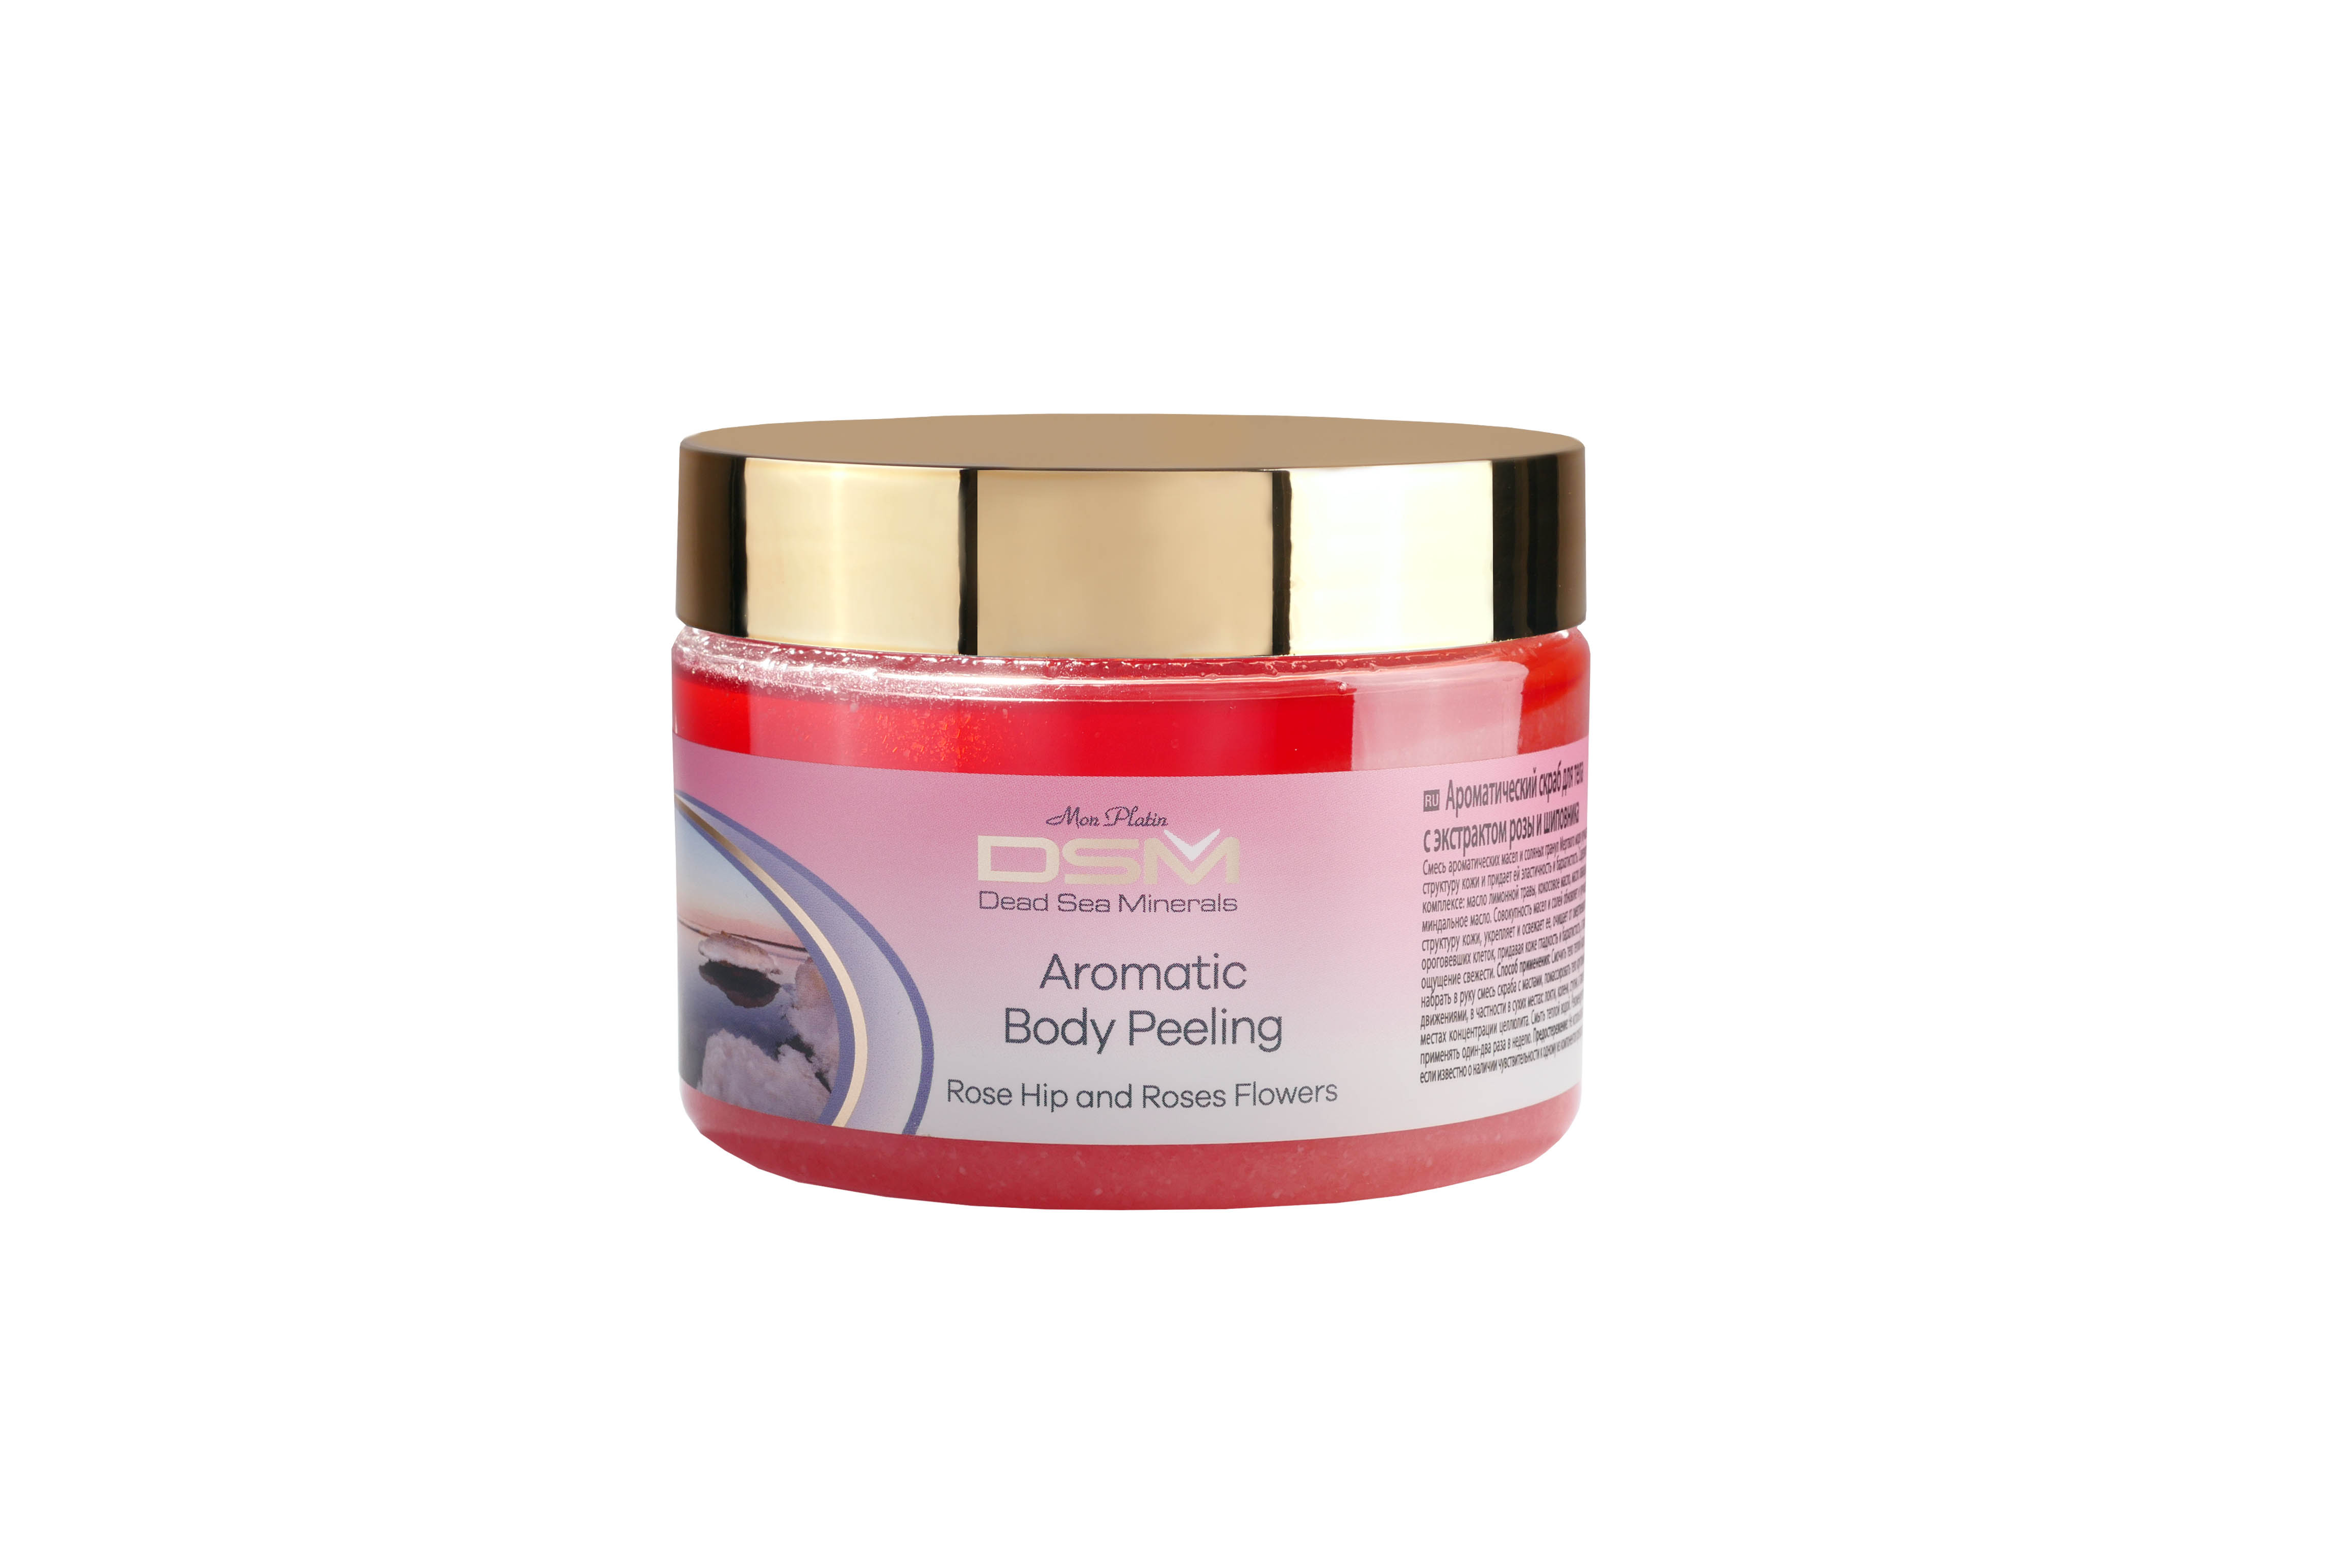 Aromatic Body Peeling scented with certain Rose Hip and Roses Flowers aroma